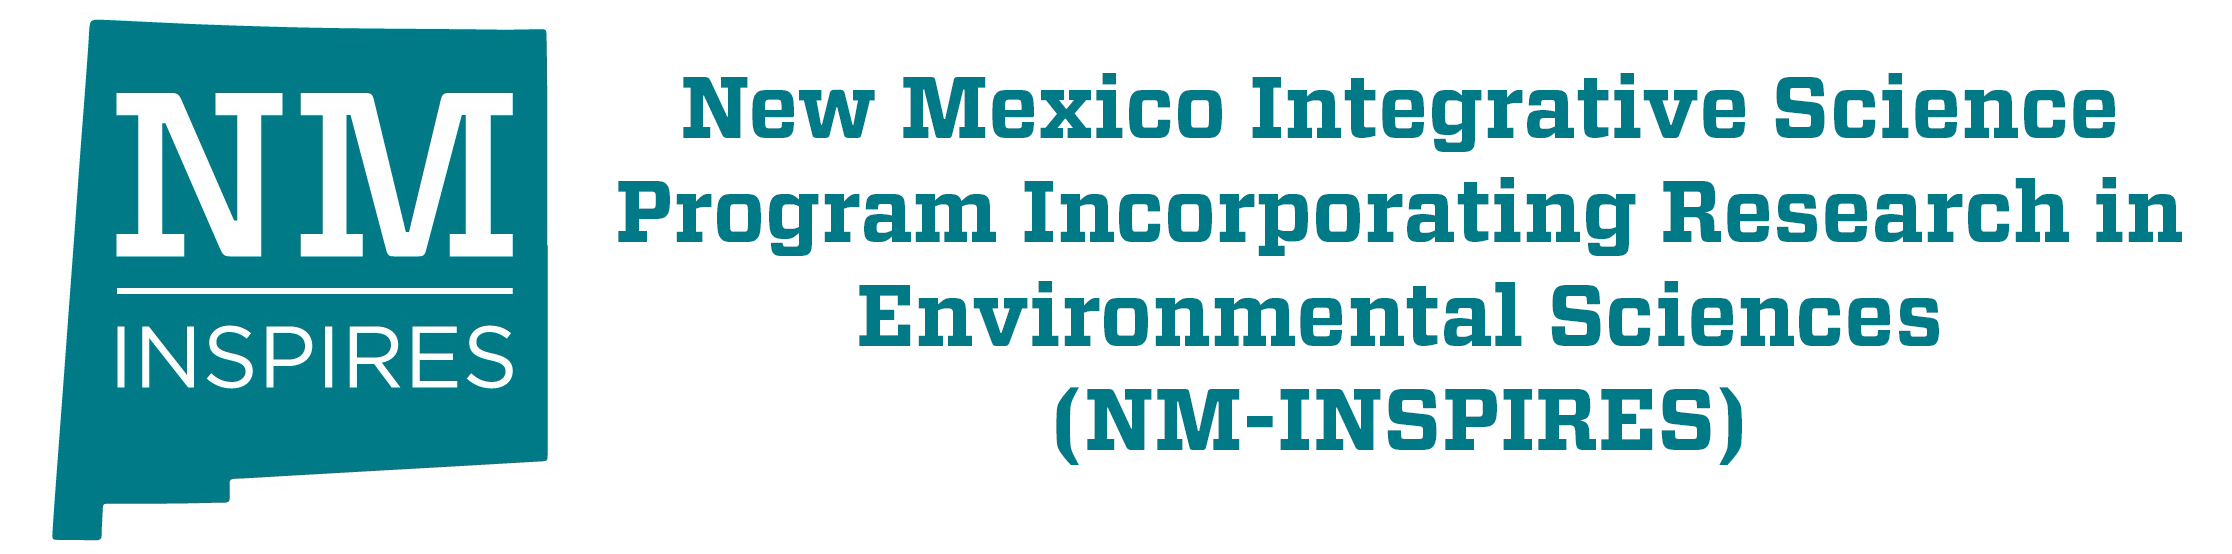 New Mexico Integrative Science Program Incorporating Research in Environmental Sciences (NM-INSPIRES)